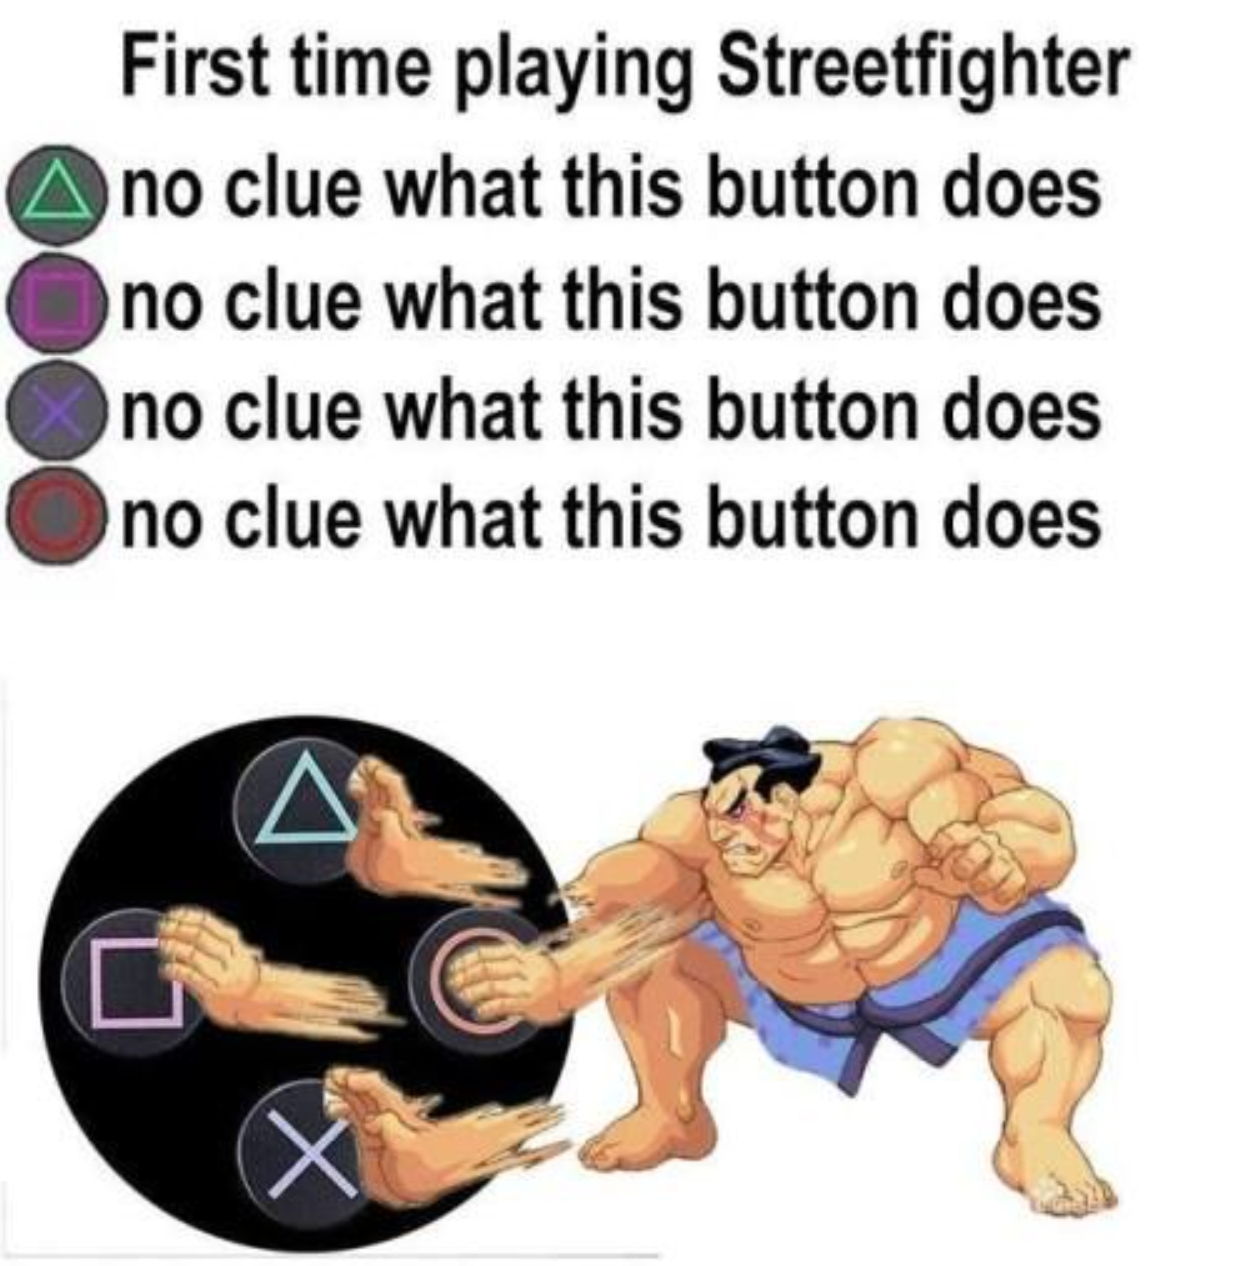 funny gaming memes - relatable gaming memes - First time playing Streetfighter no clue what this button does no clue what this button does no clue what this button does no clue what this button does